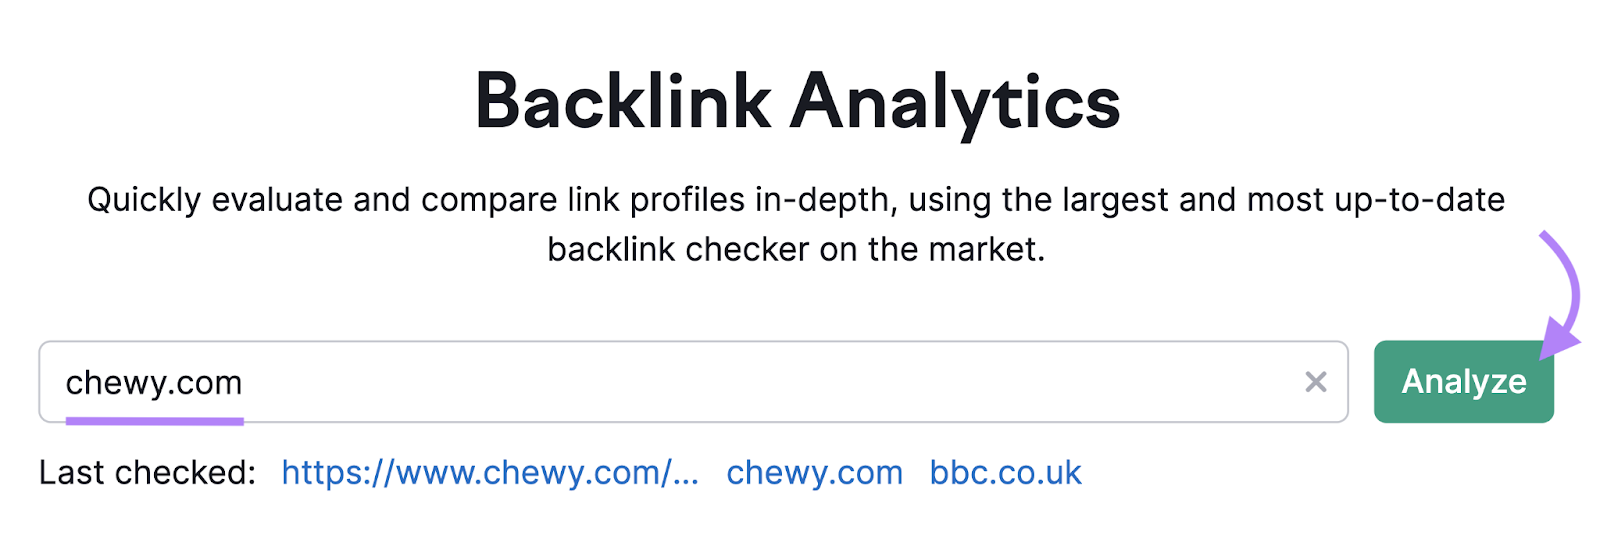 search chewy.com successful  backlink analytics tool